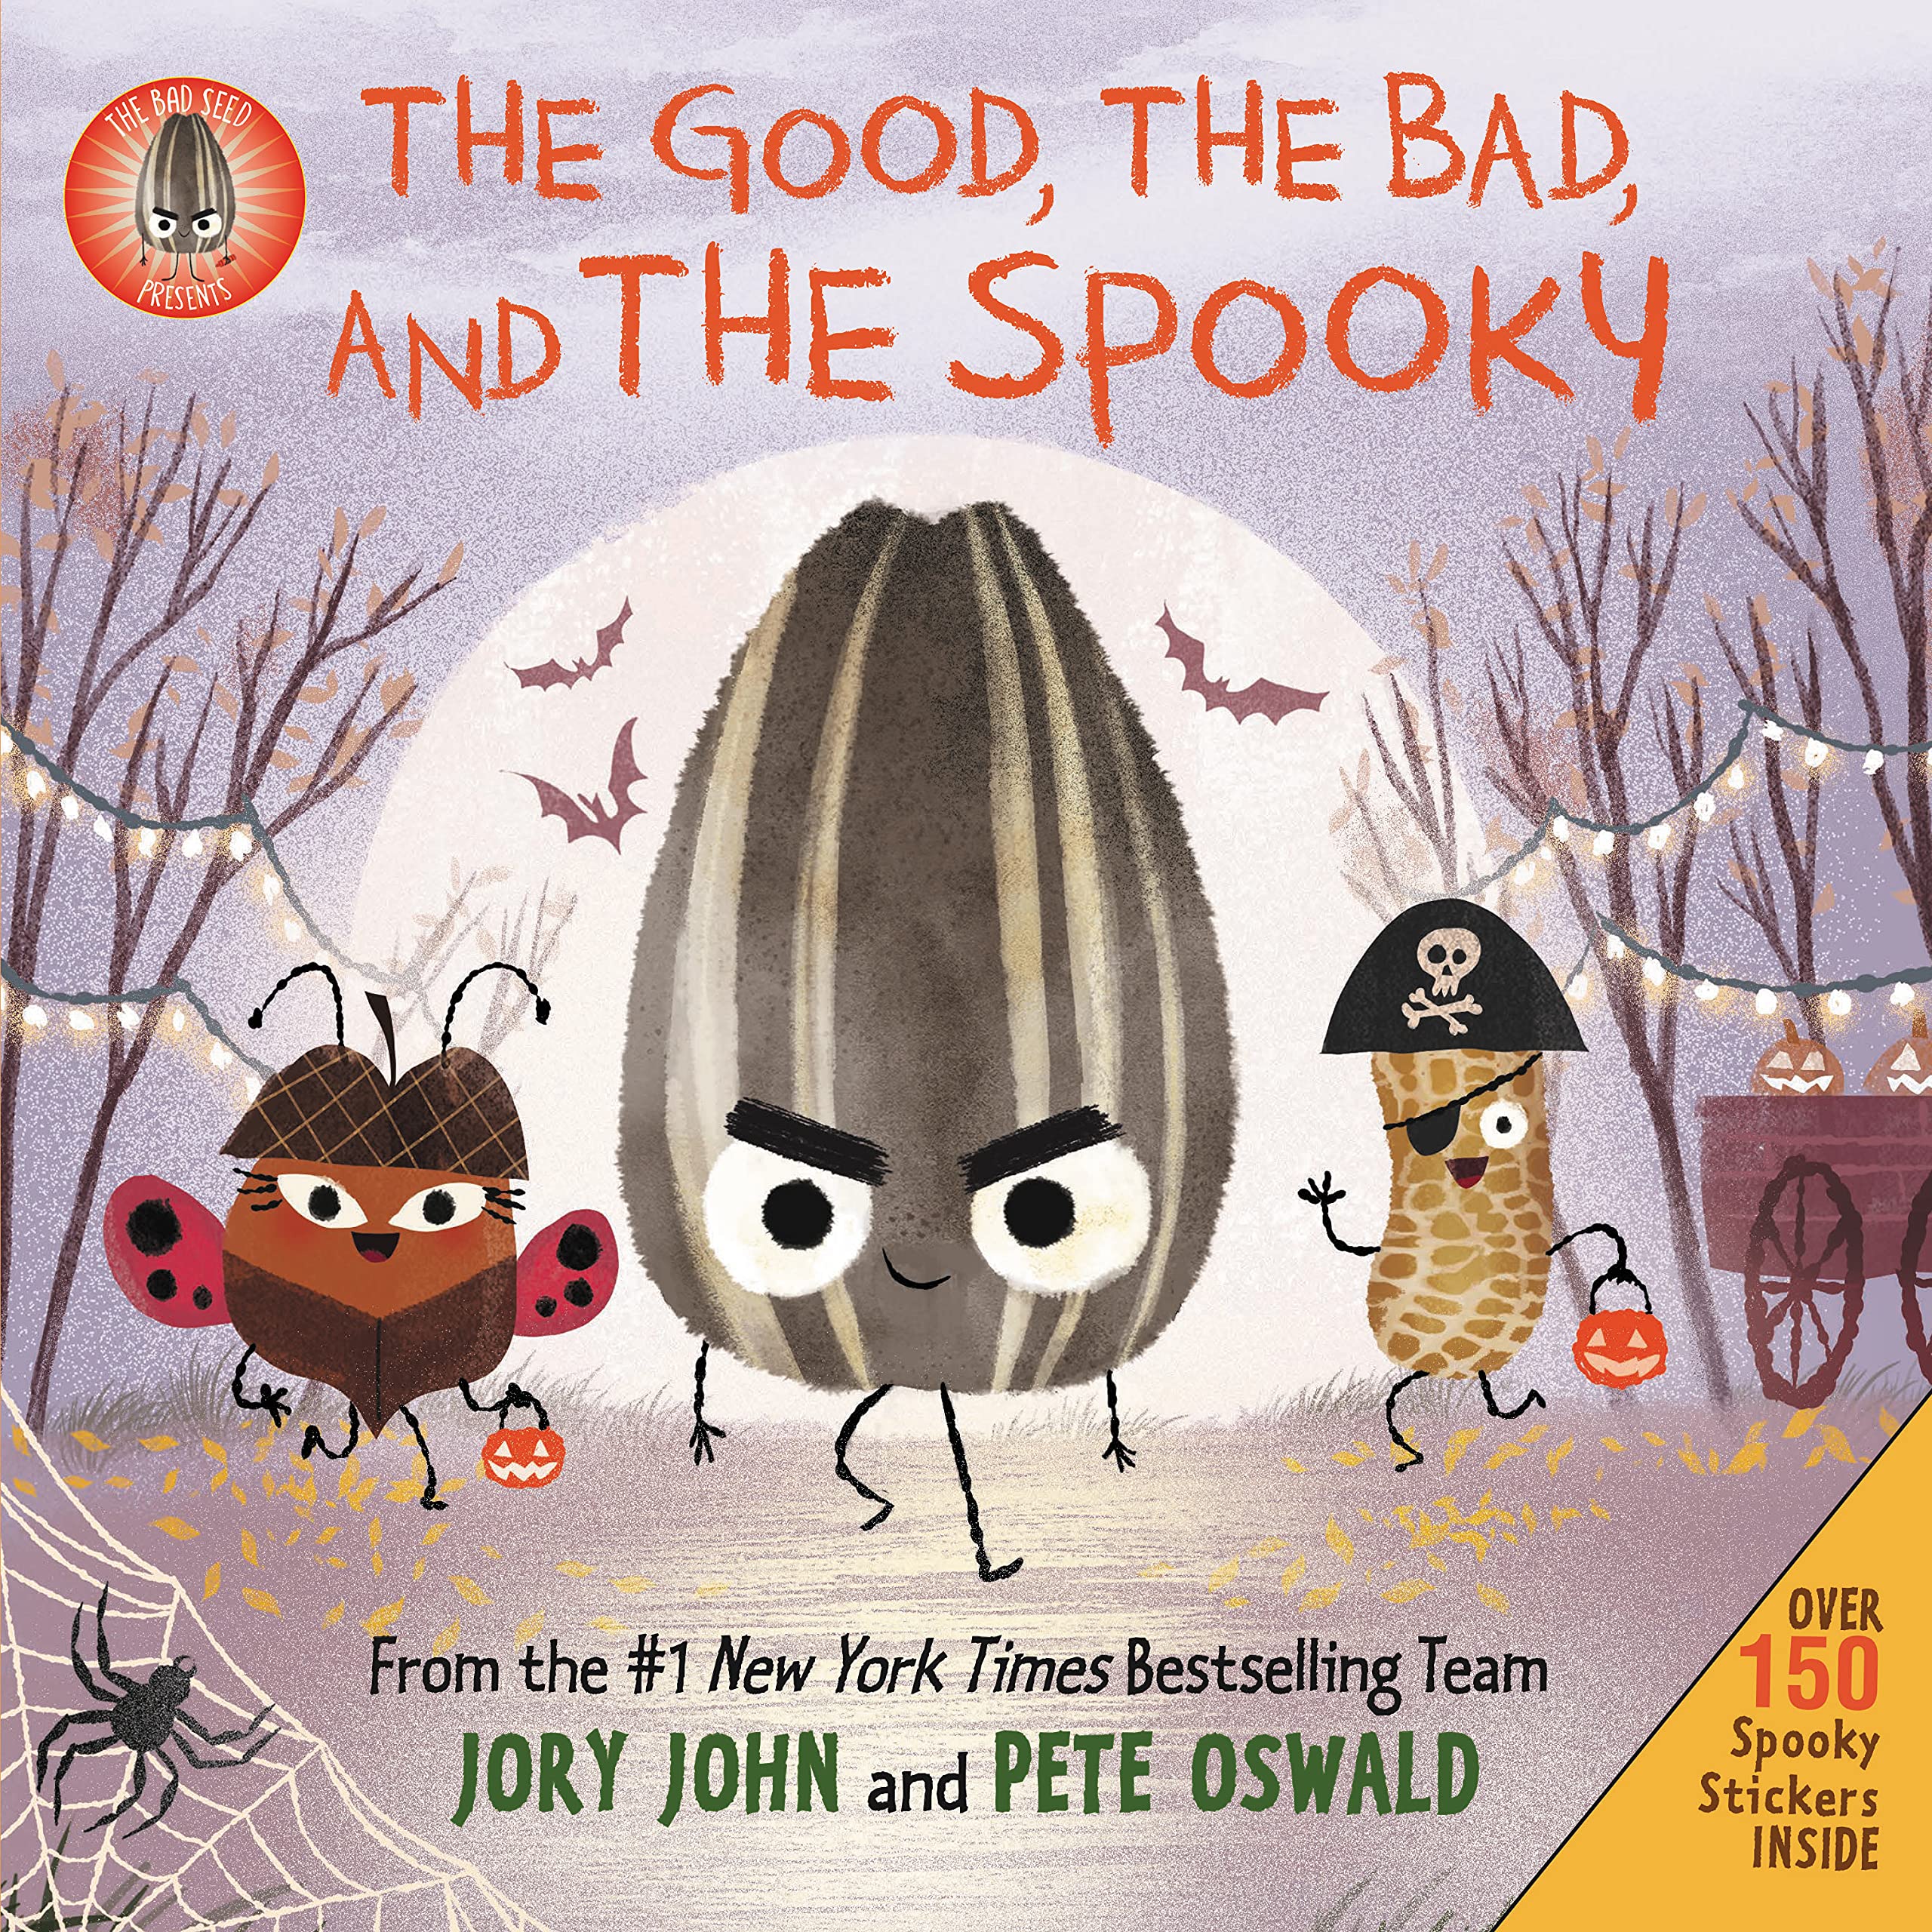 speech and language teaching concepts for The Good the Bad and the Spooky in speech therapy